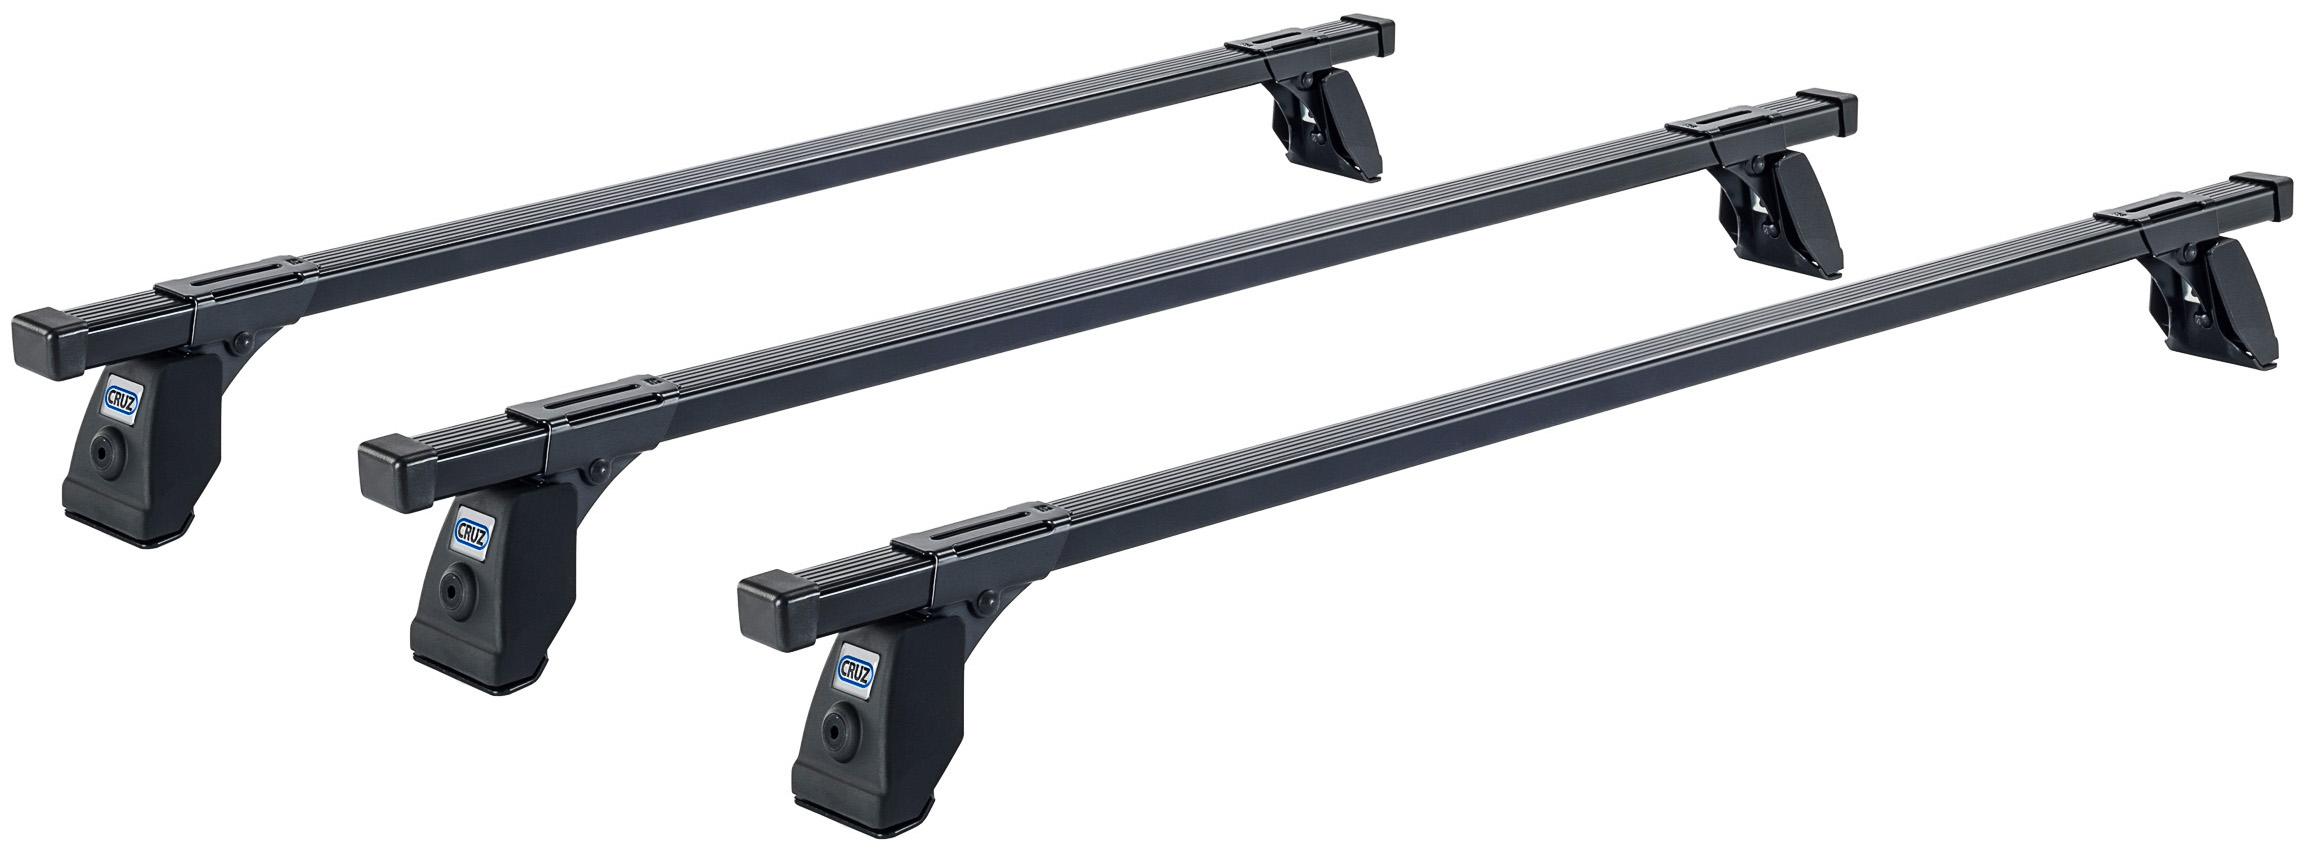 Cruz Commercial Roof Bars 30 X 20 922-437 - Pack Of 2